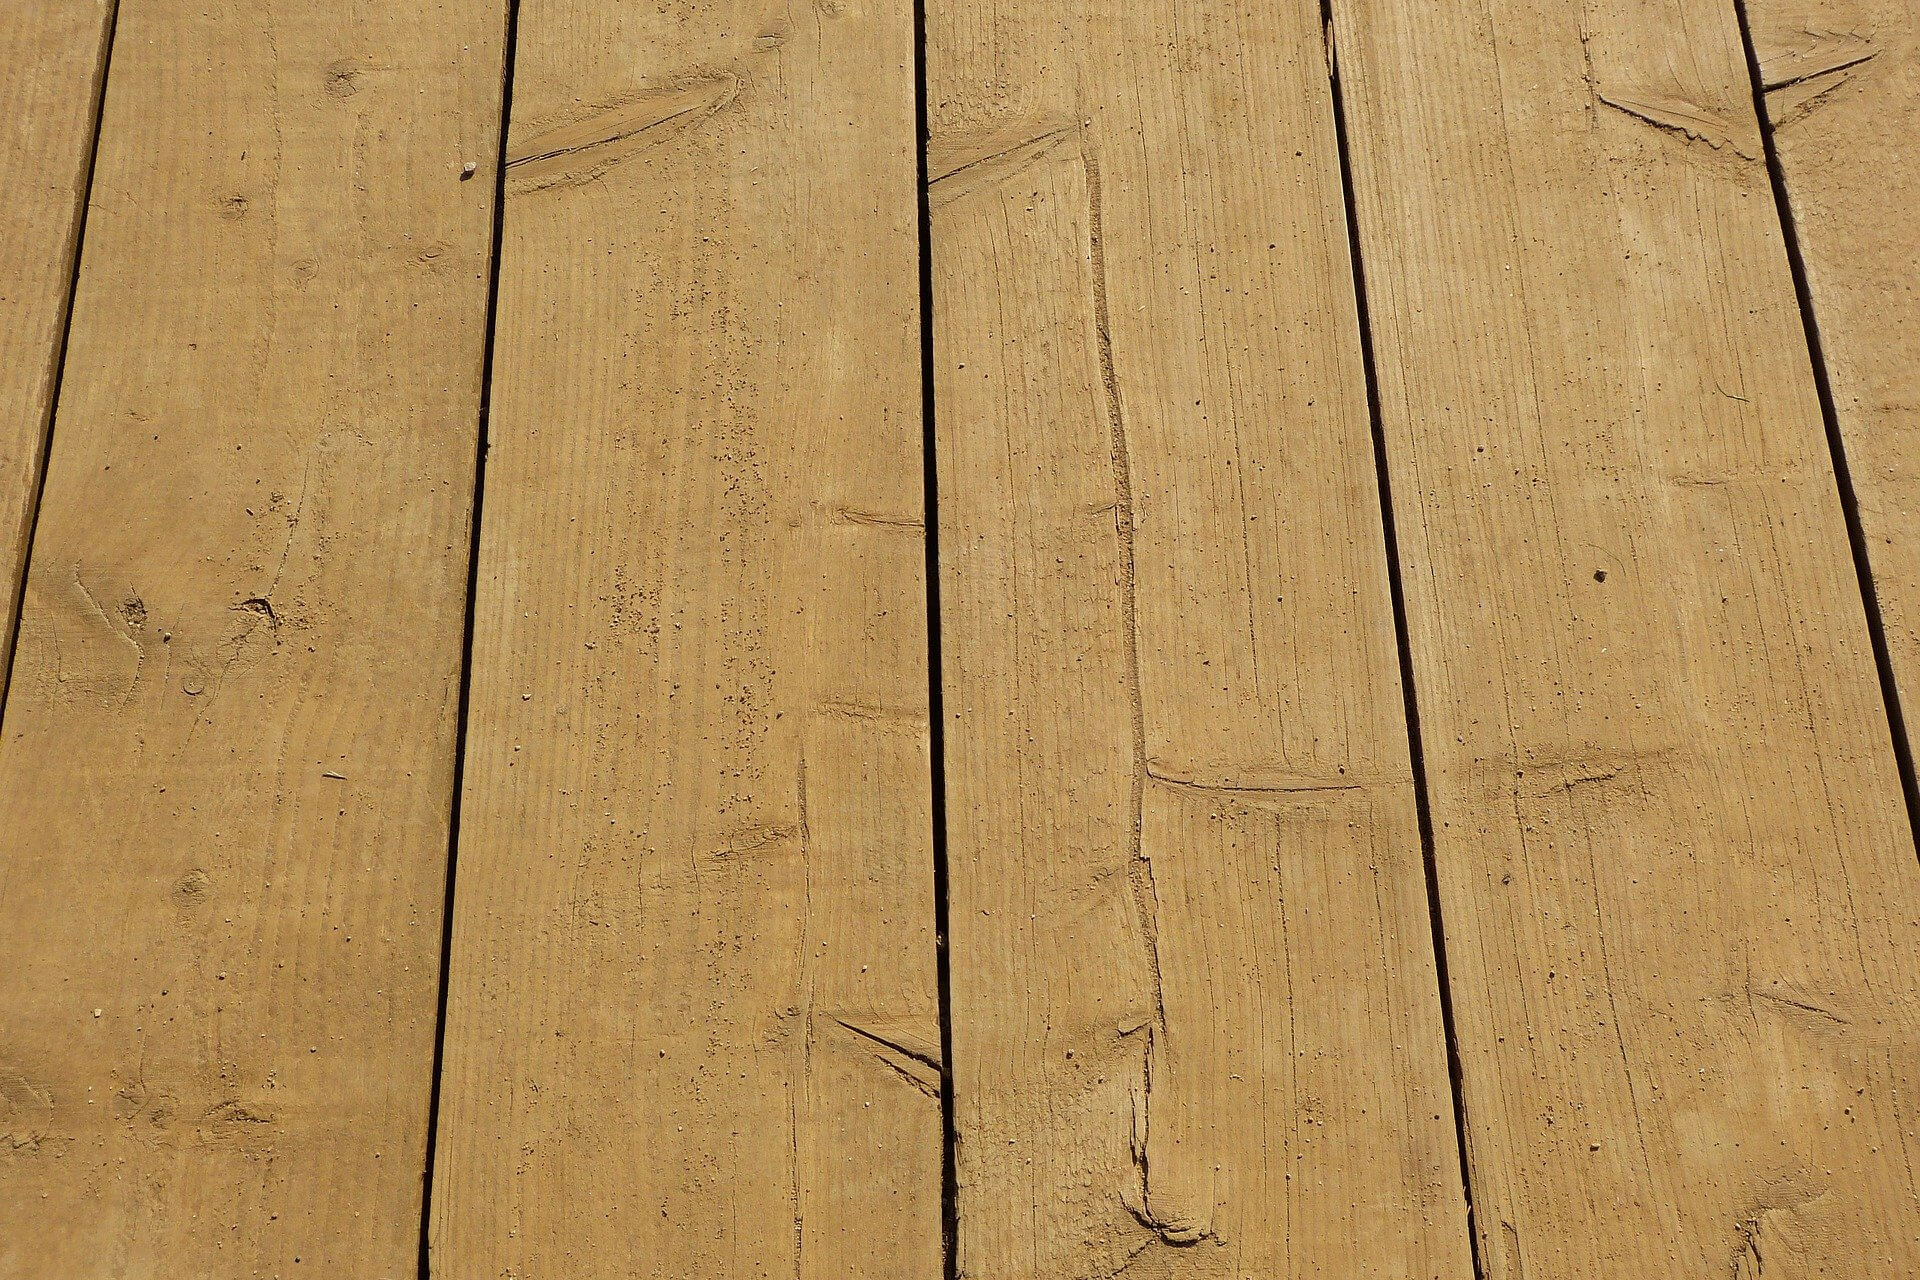 Professional Decking services in Shepton Mallet